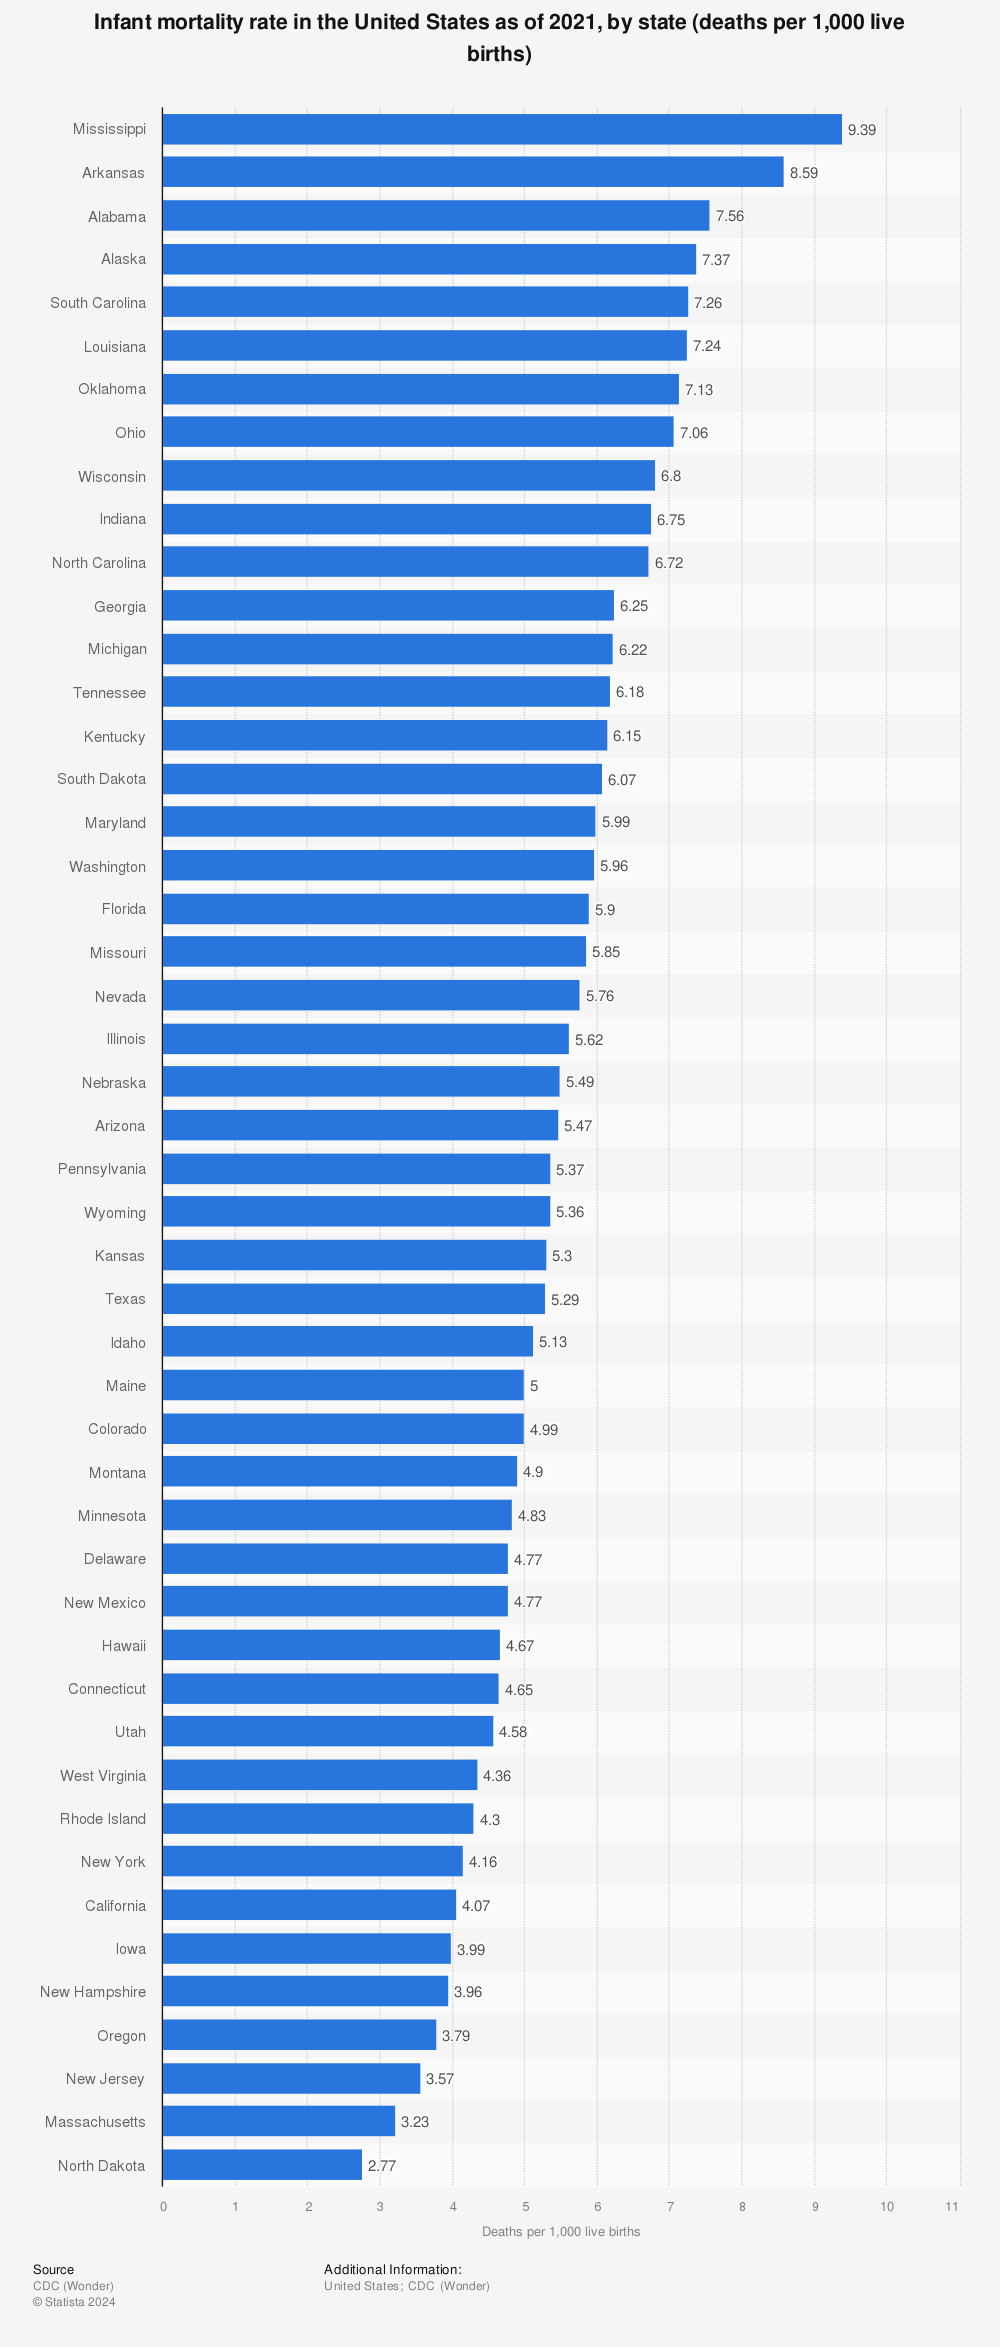 Statistic: Infant mortality rate in the United States as of 2020, by state (deaths per 1,000 live births) | Statista